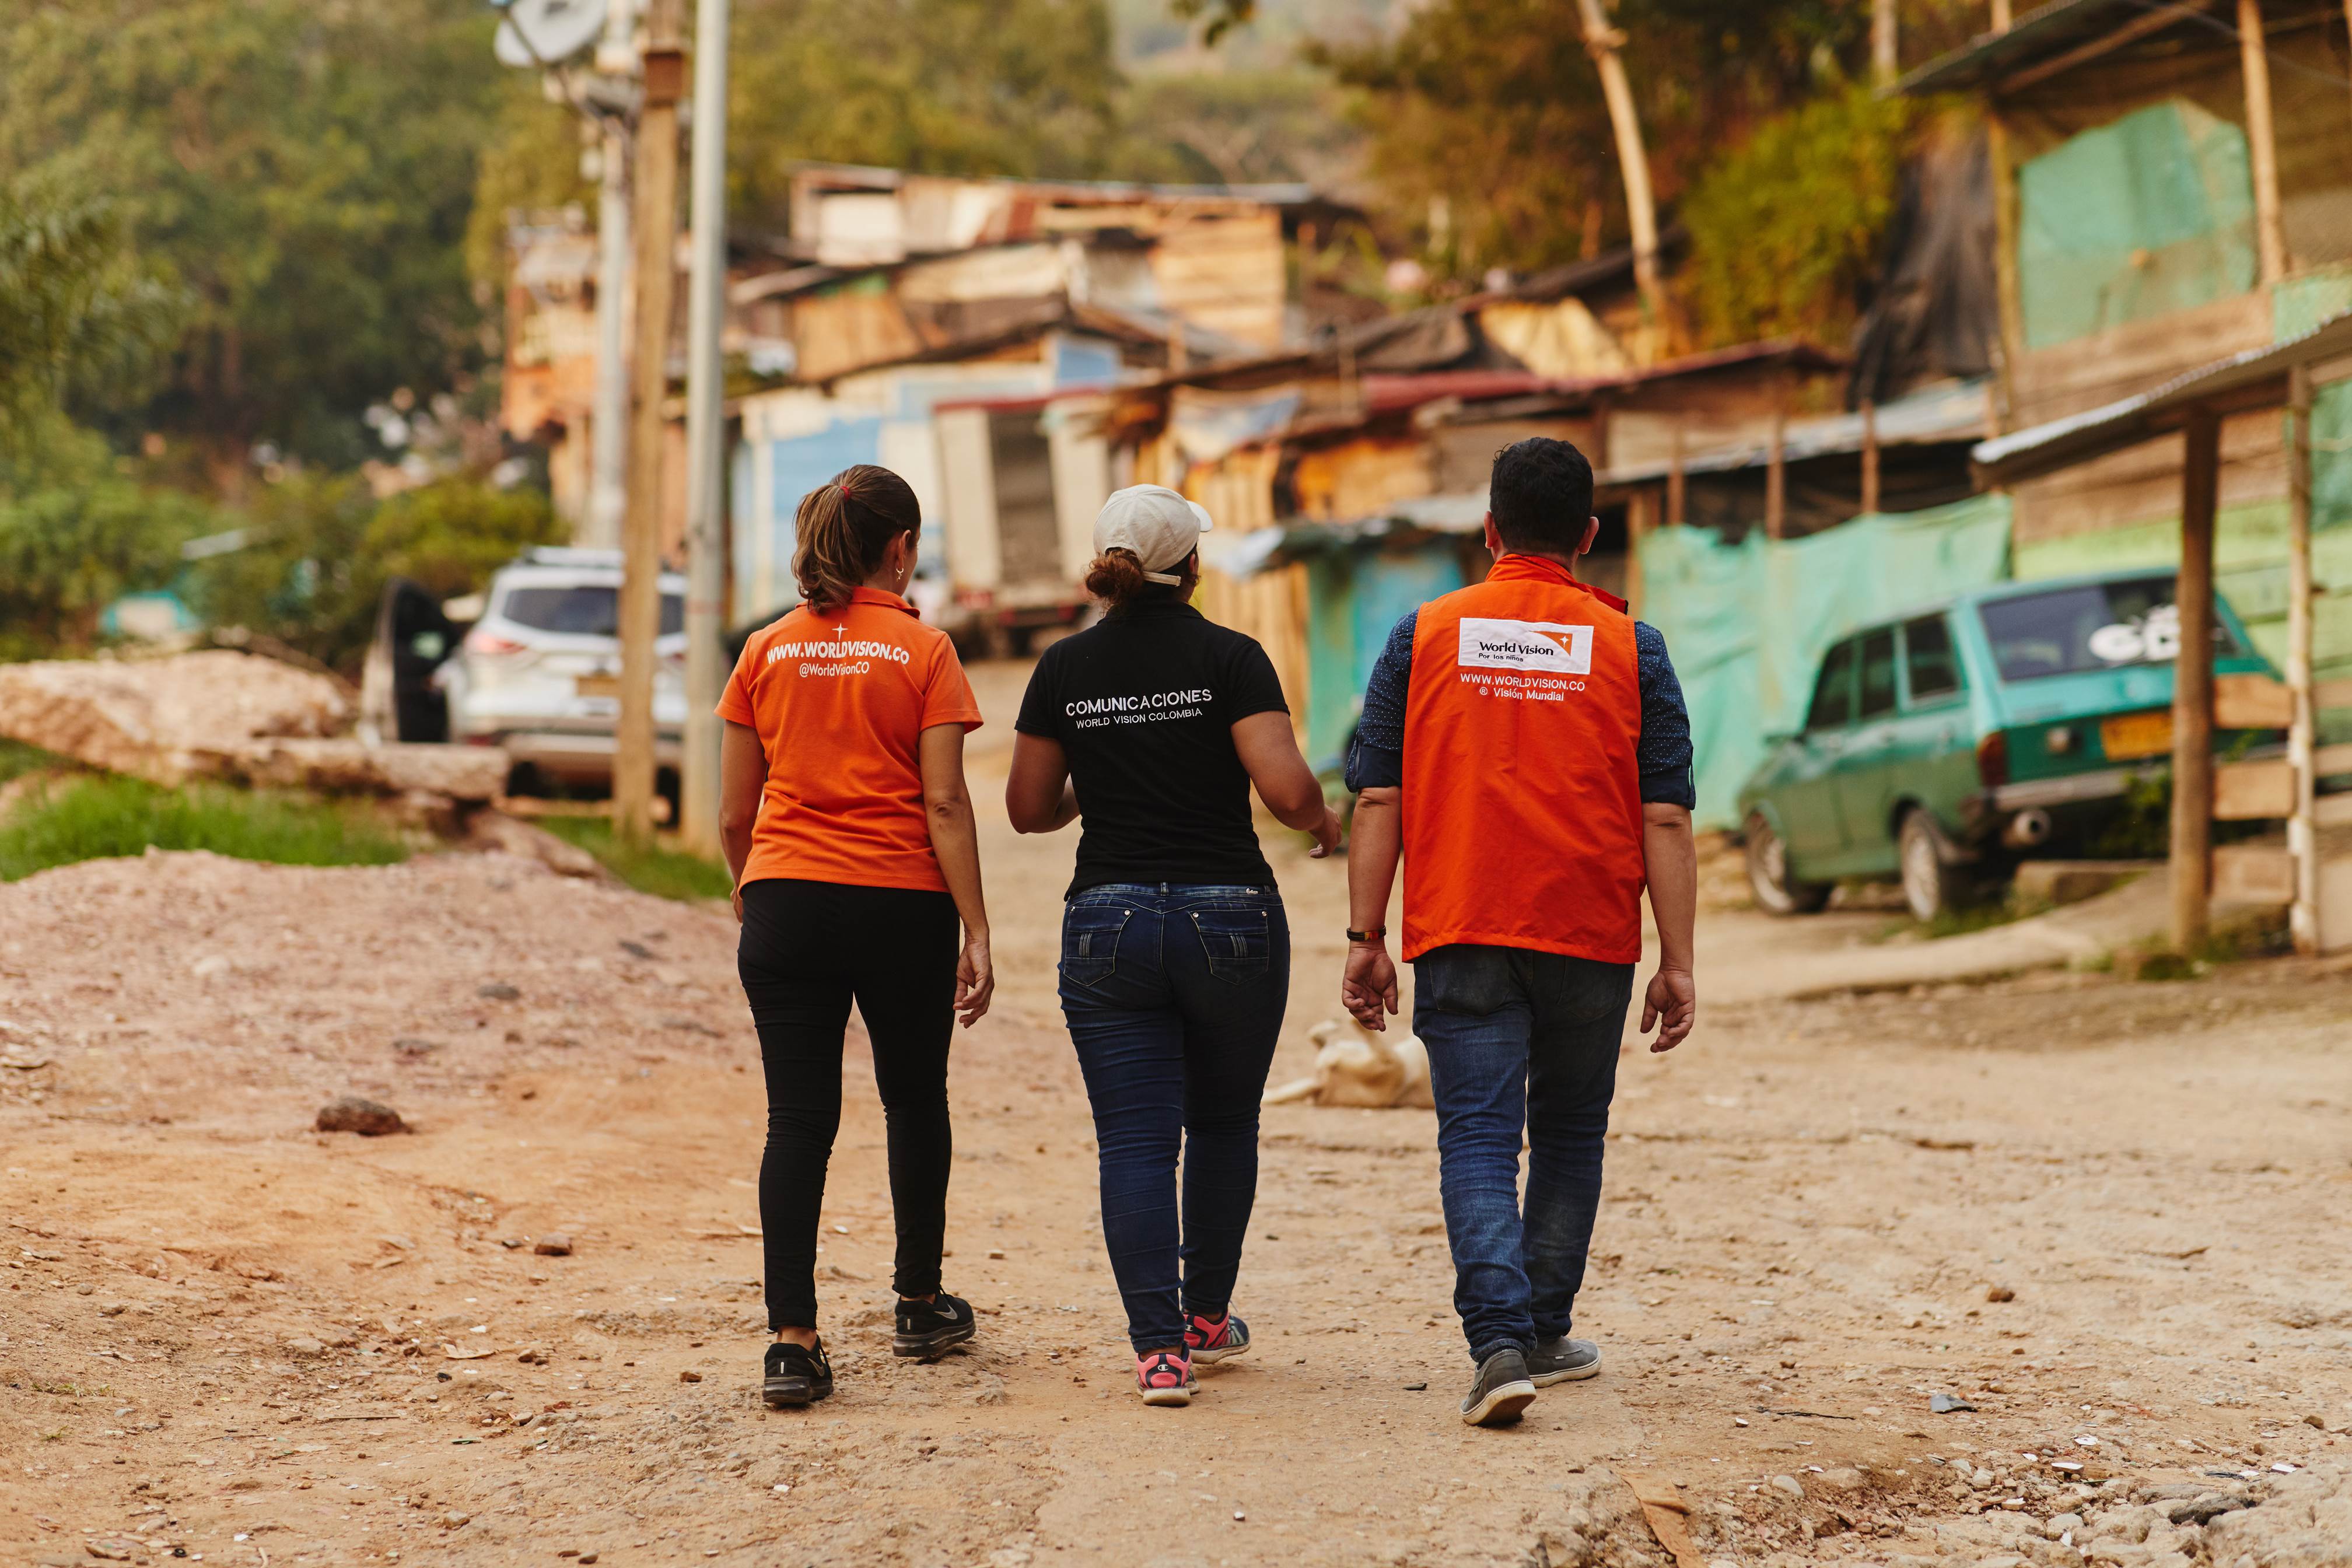 Two World Vision staff walk with a lady, backs to the camera, through streets in Colombia